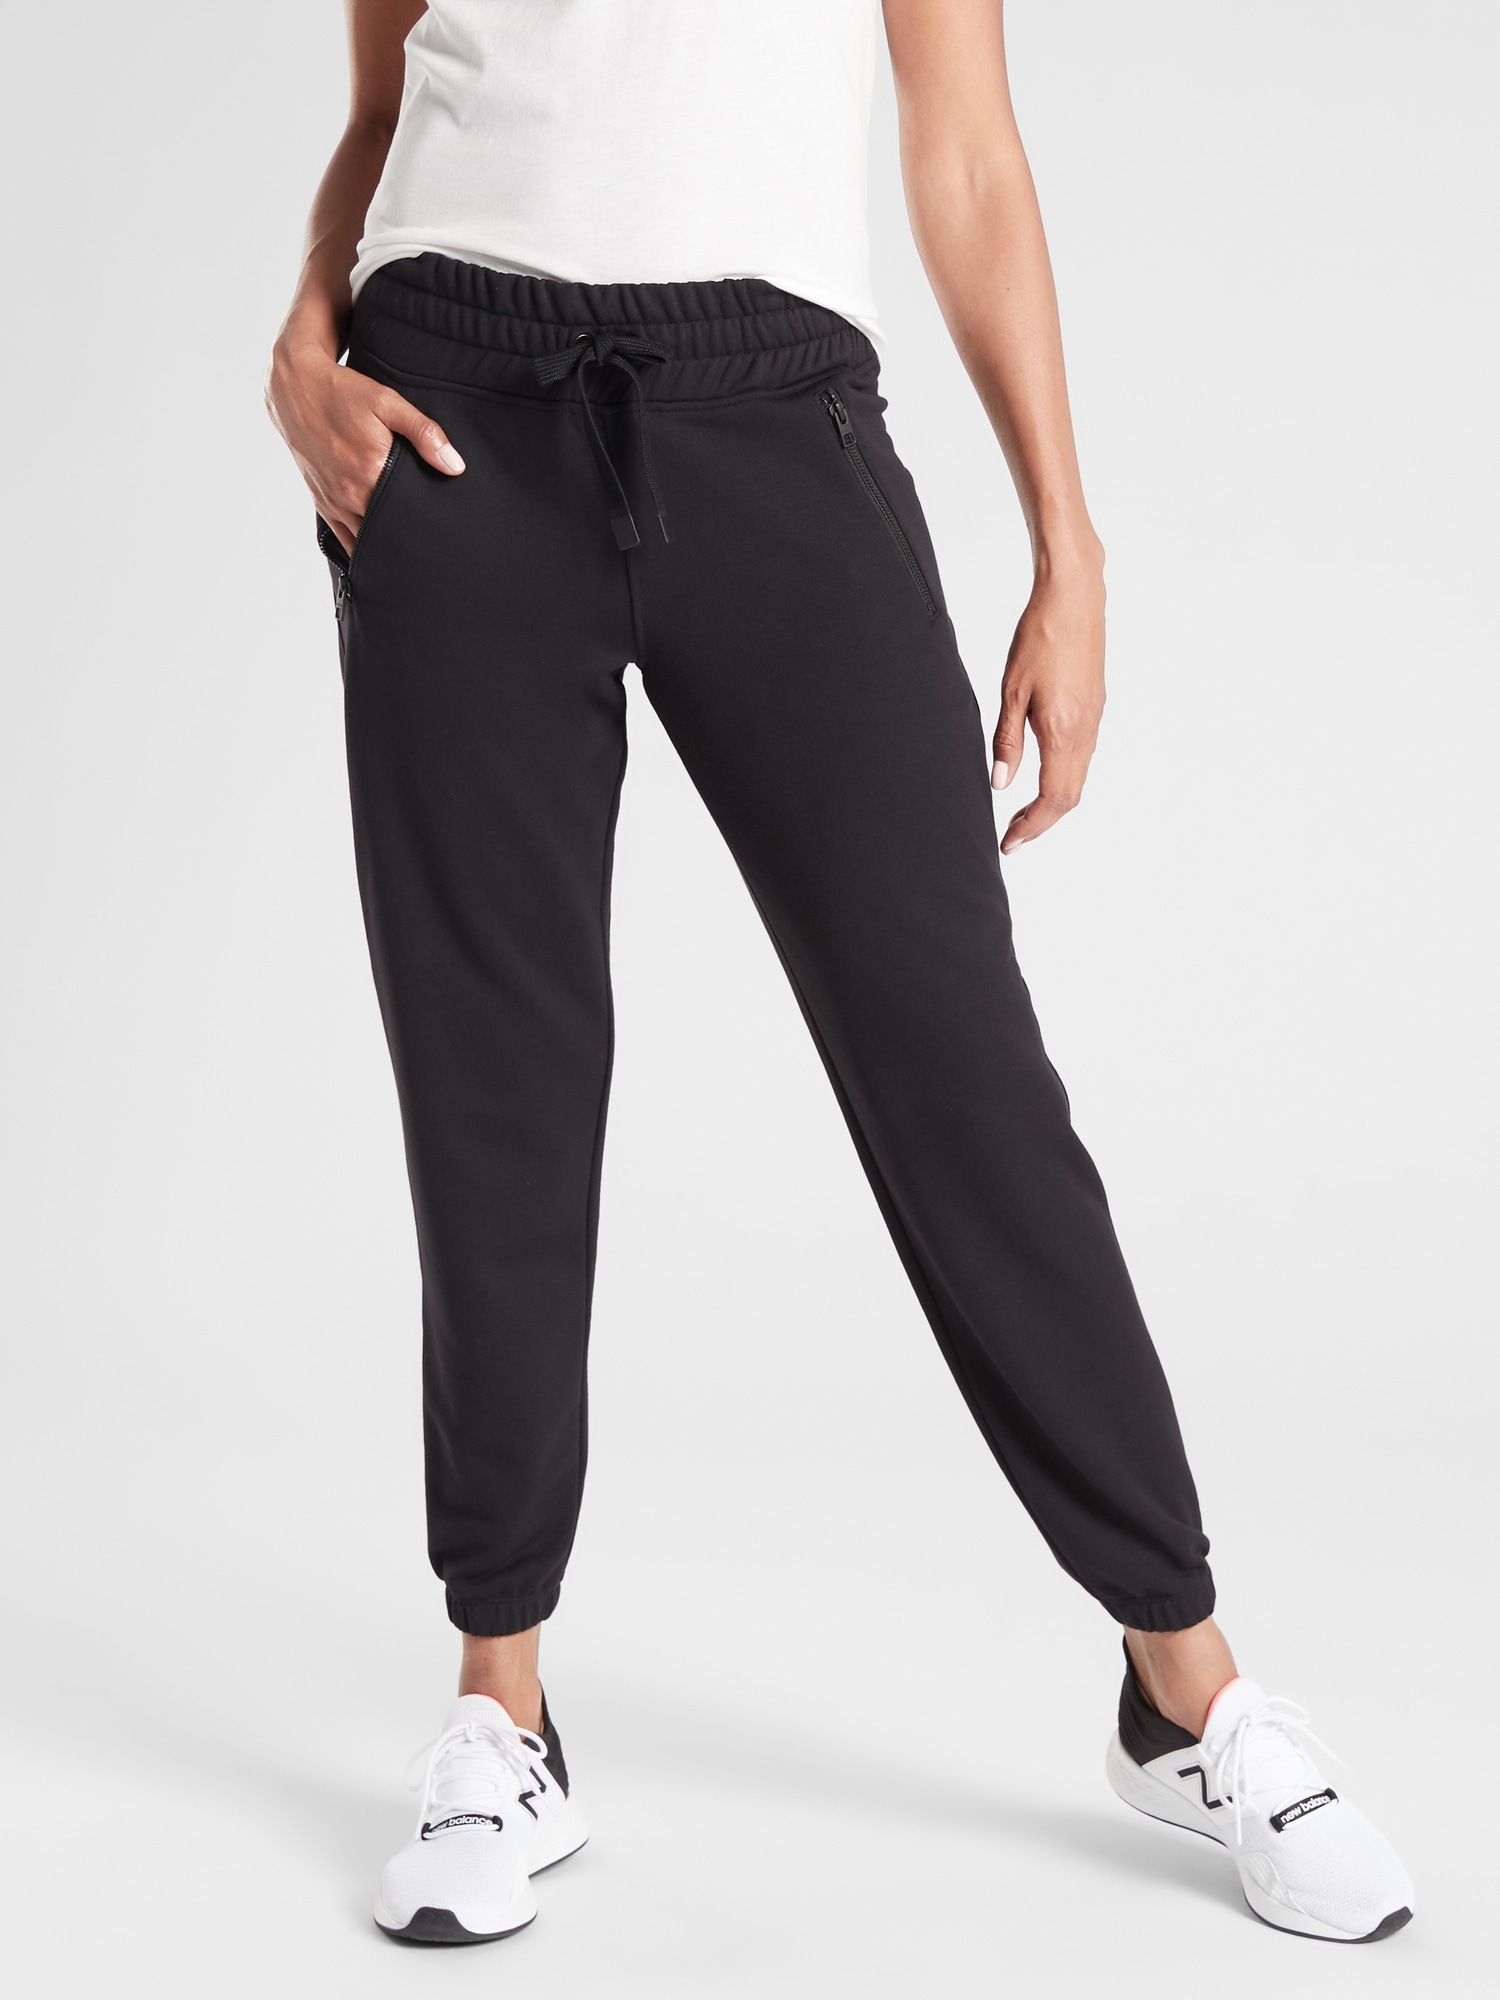 Athleta Synthetic Coaster Sweatpant in Joggers \u0026 Sweatpants | Athleta Athleta...